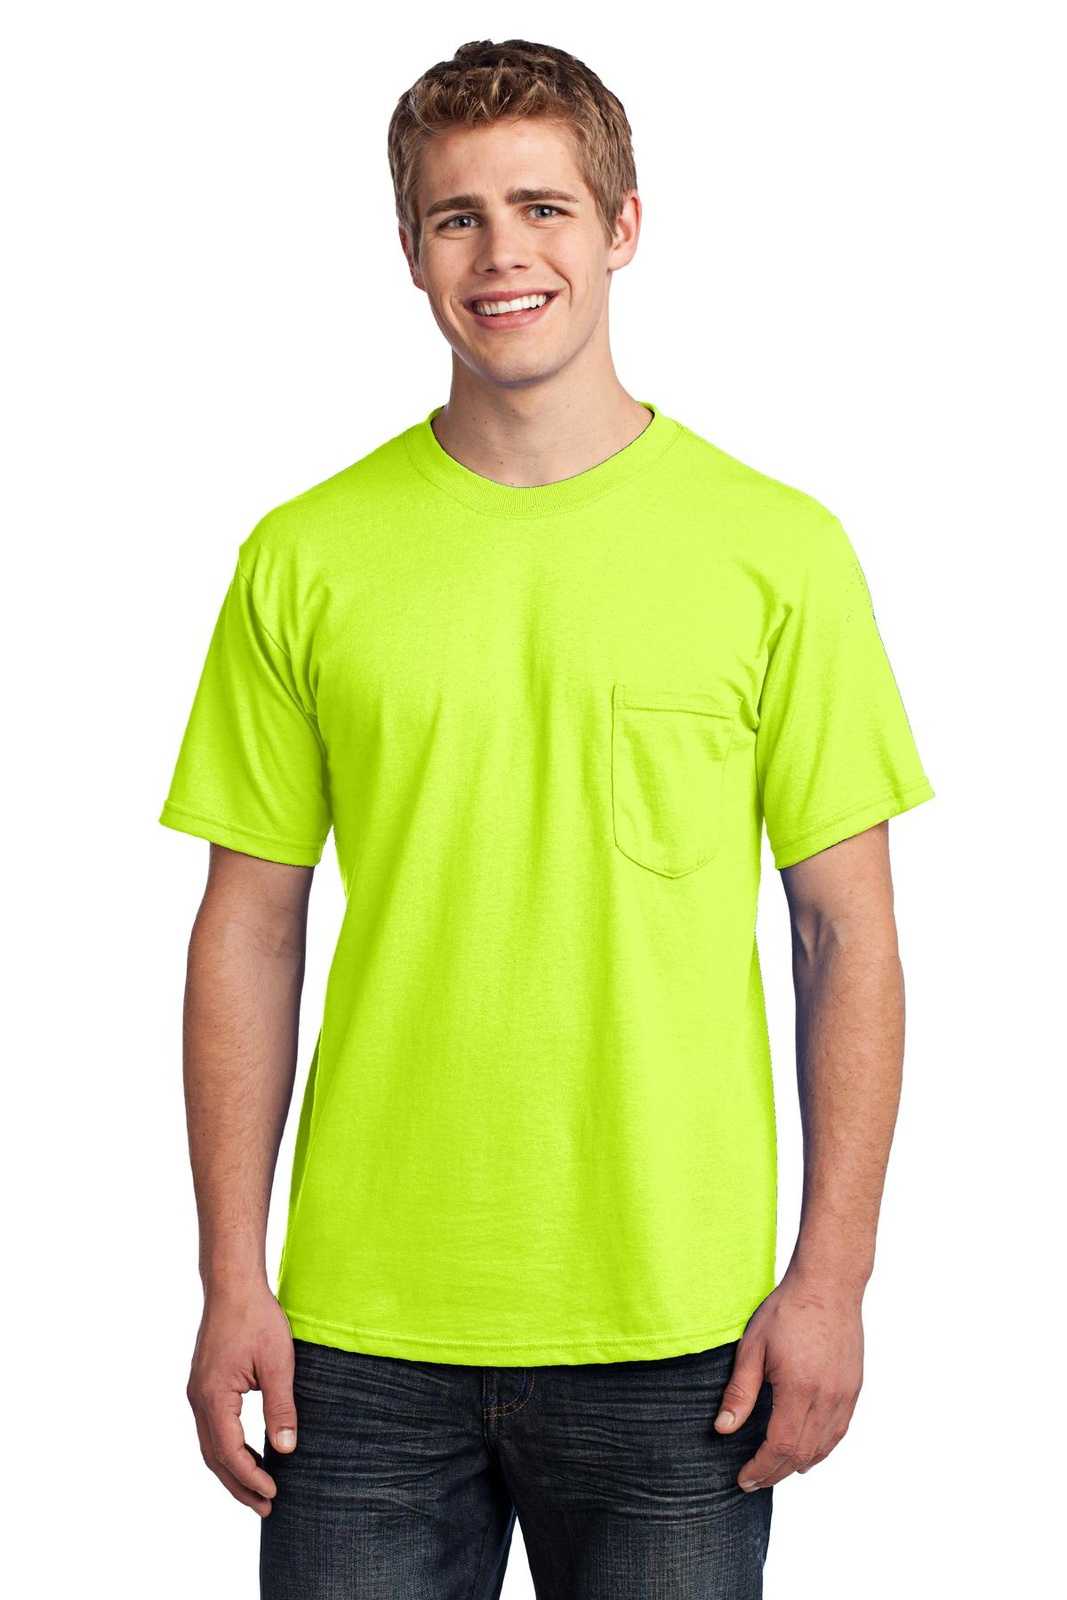 Port & Company USA100P All-American Pocket Tee - Safety Green - HIT a Double - 1